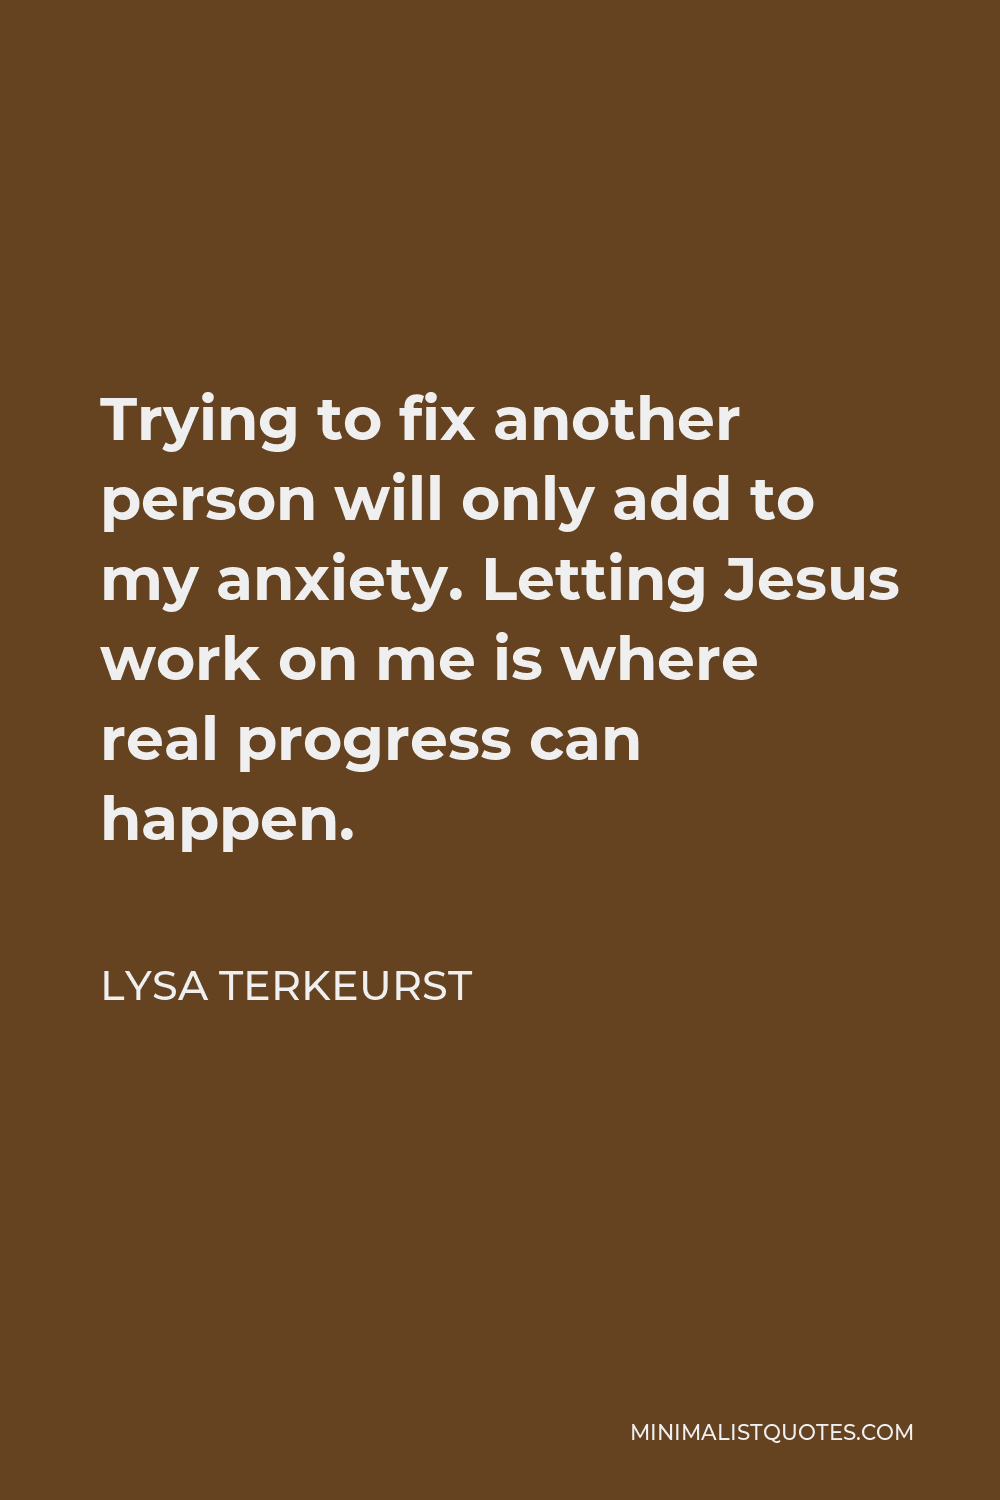 Lysa TerKeurst Quote - Trying to fix another person will only add to my anxiety. Letting Jesus work on me is where real progress can happen.